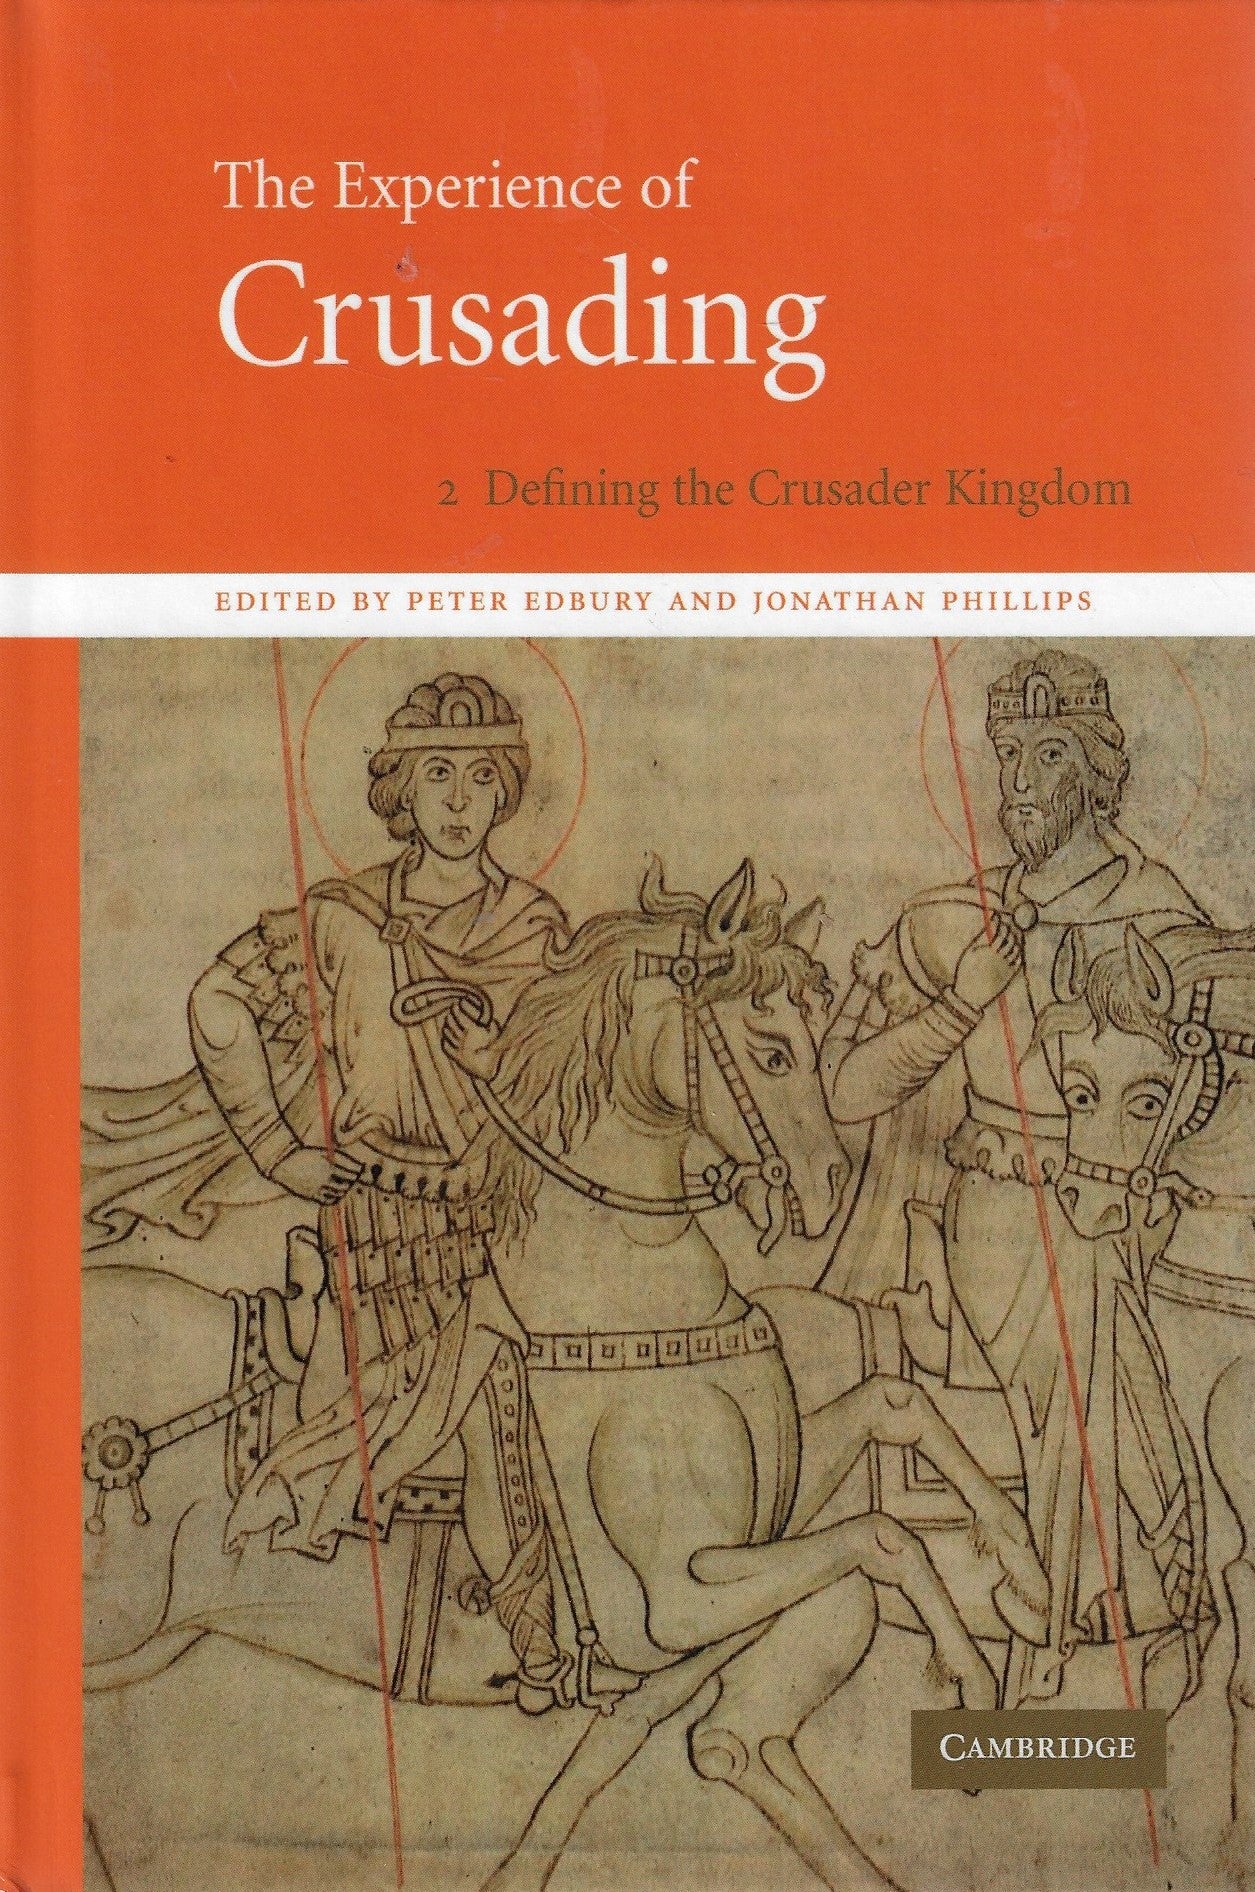 The Experience of Crusading Volume 2 - Defining the Crusader Kingdom